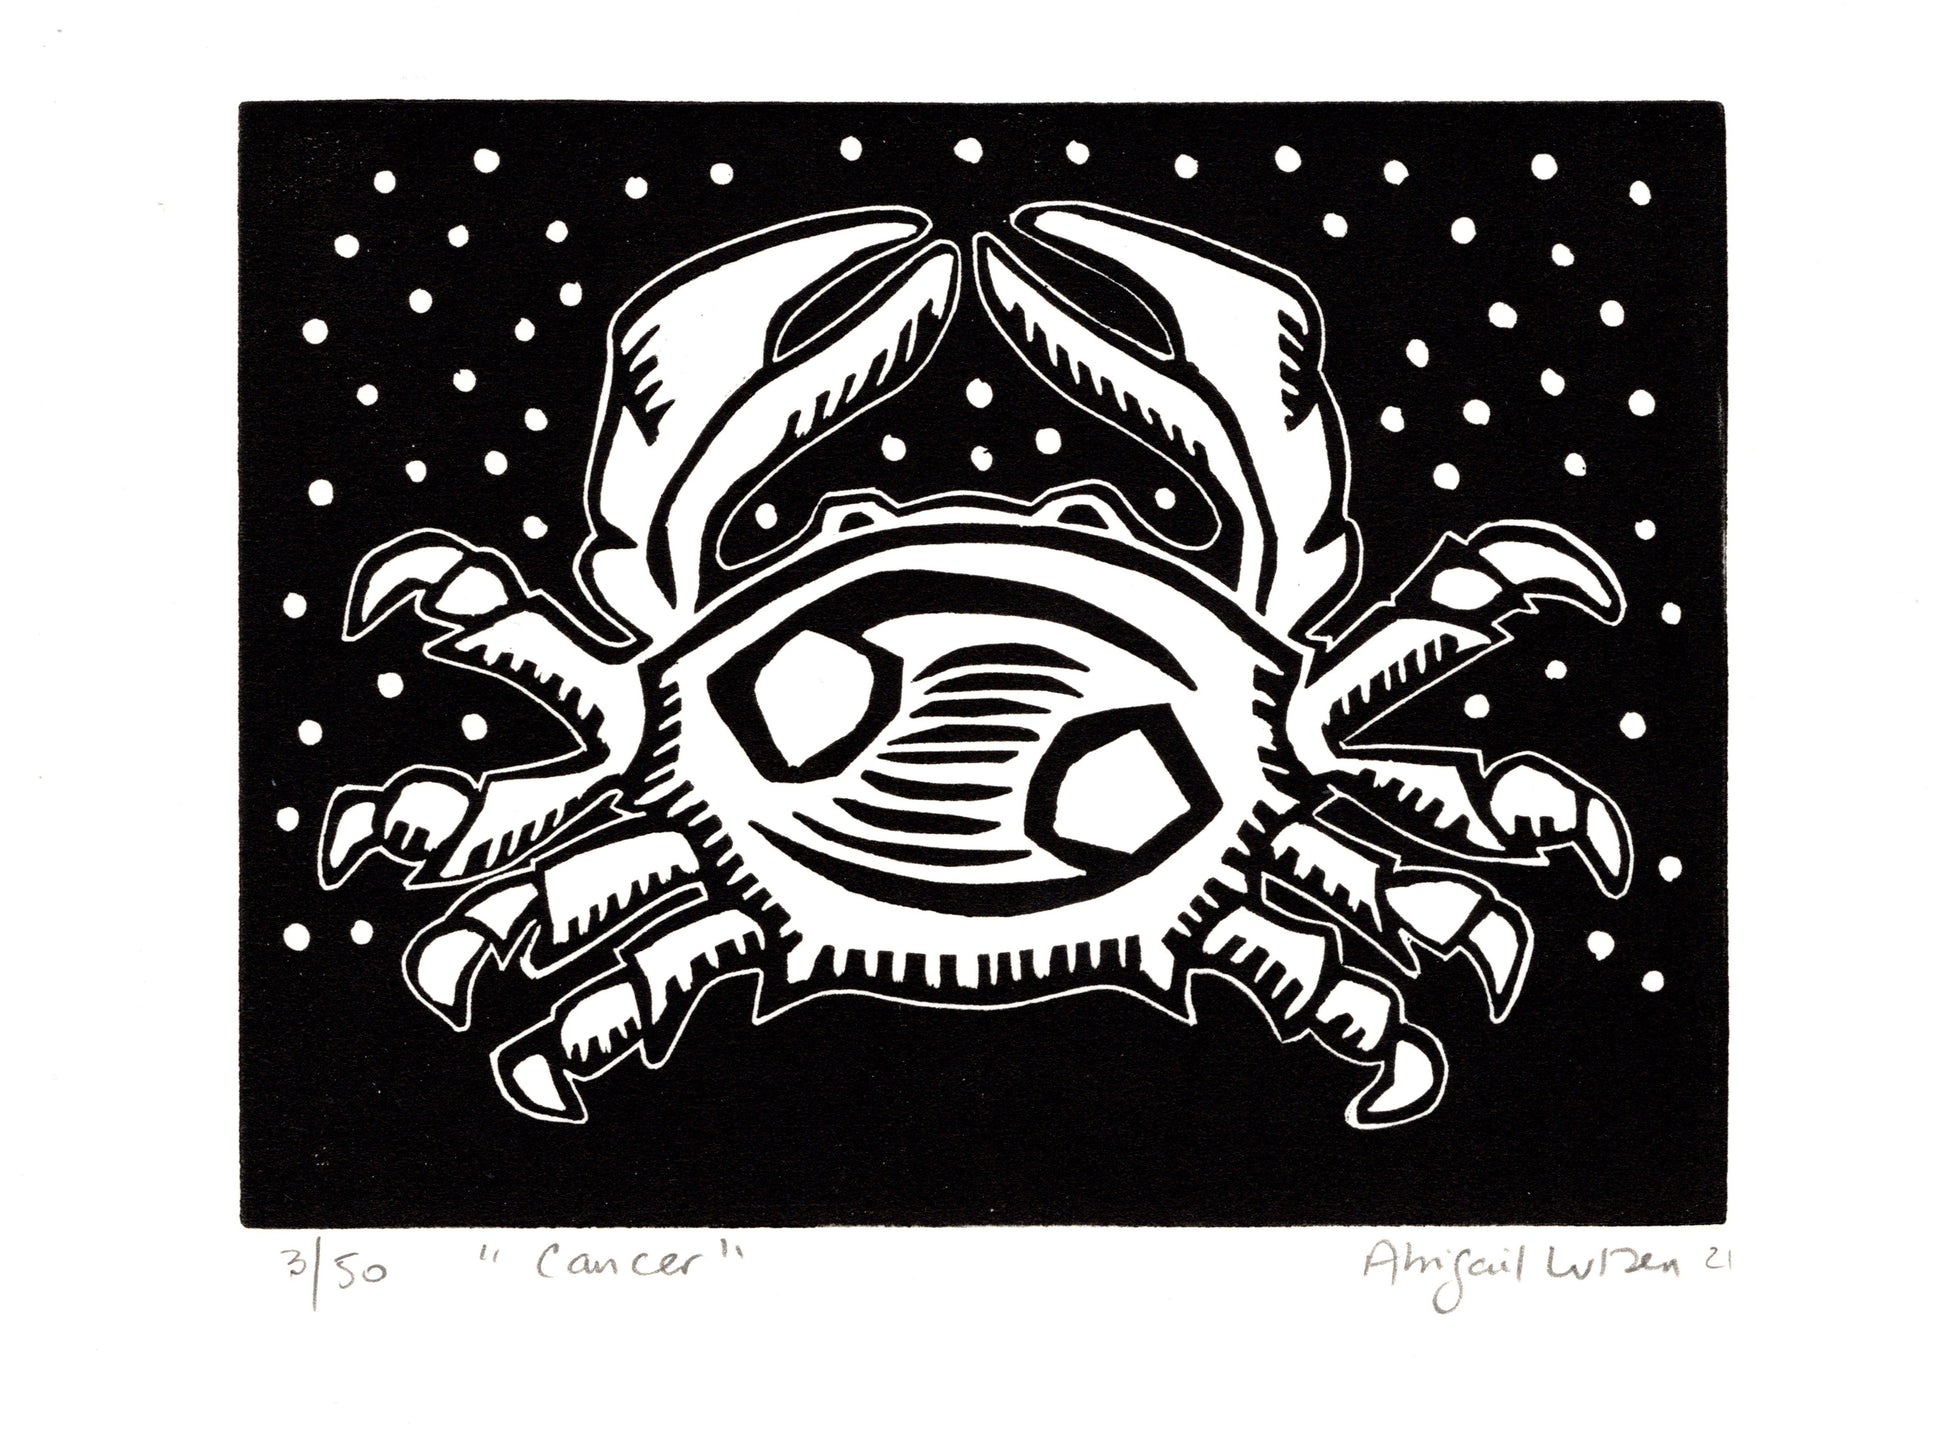 Limited edition linocut print 'Cancer', depicting a stylized crab representing the Cancer zodiac sign